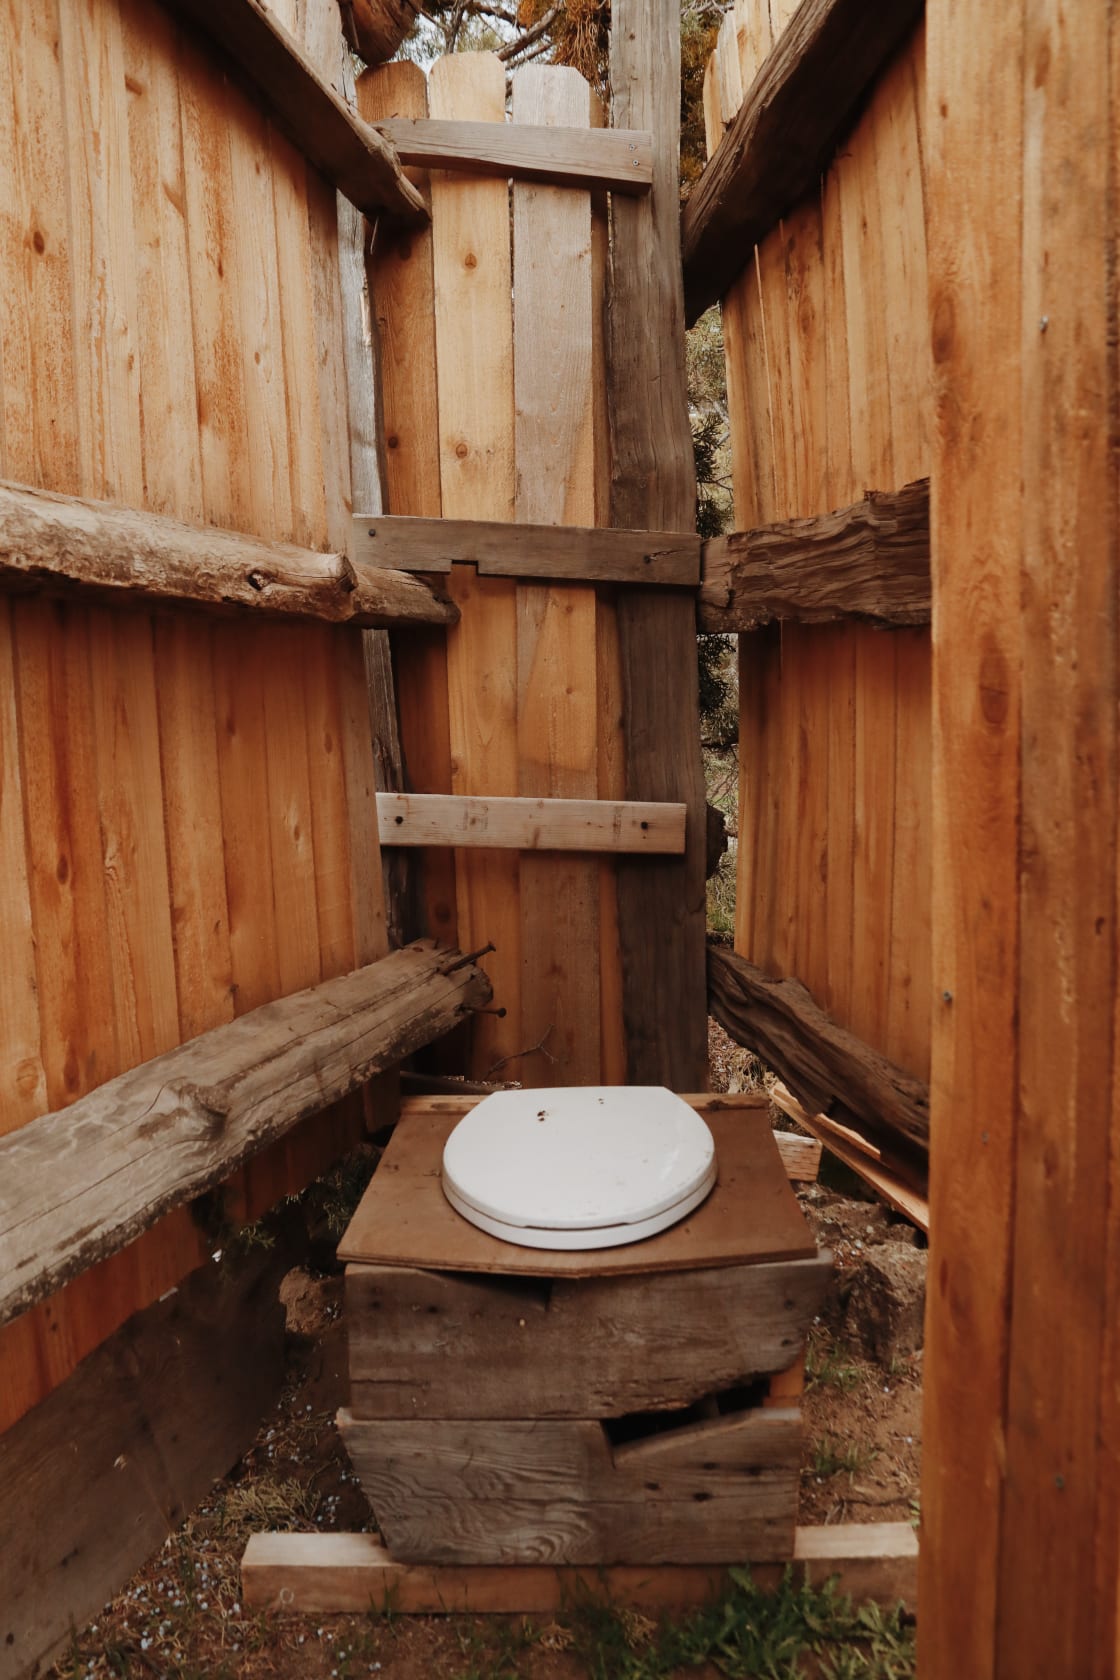 Our little rustic outhouse!